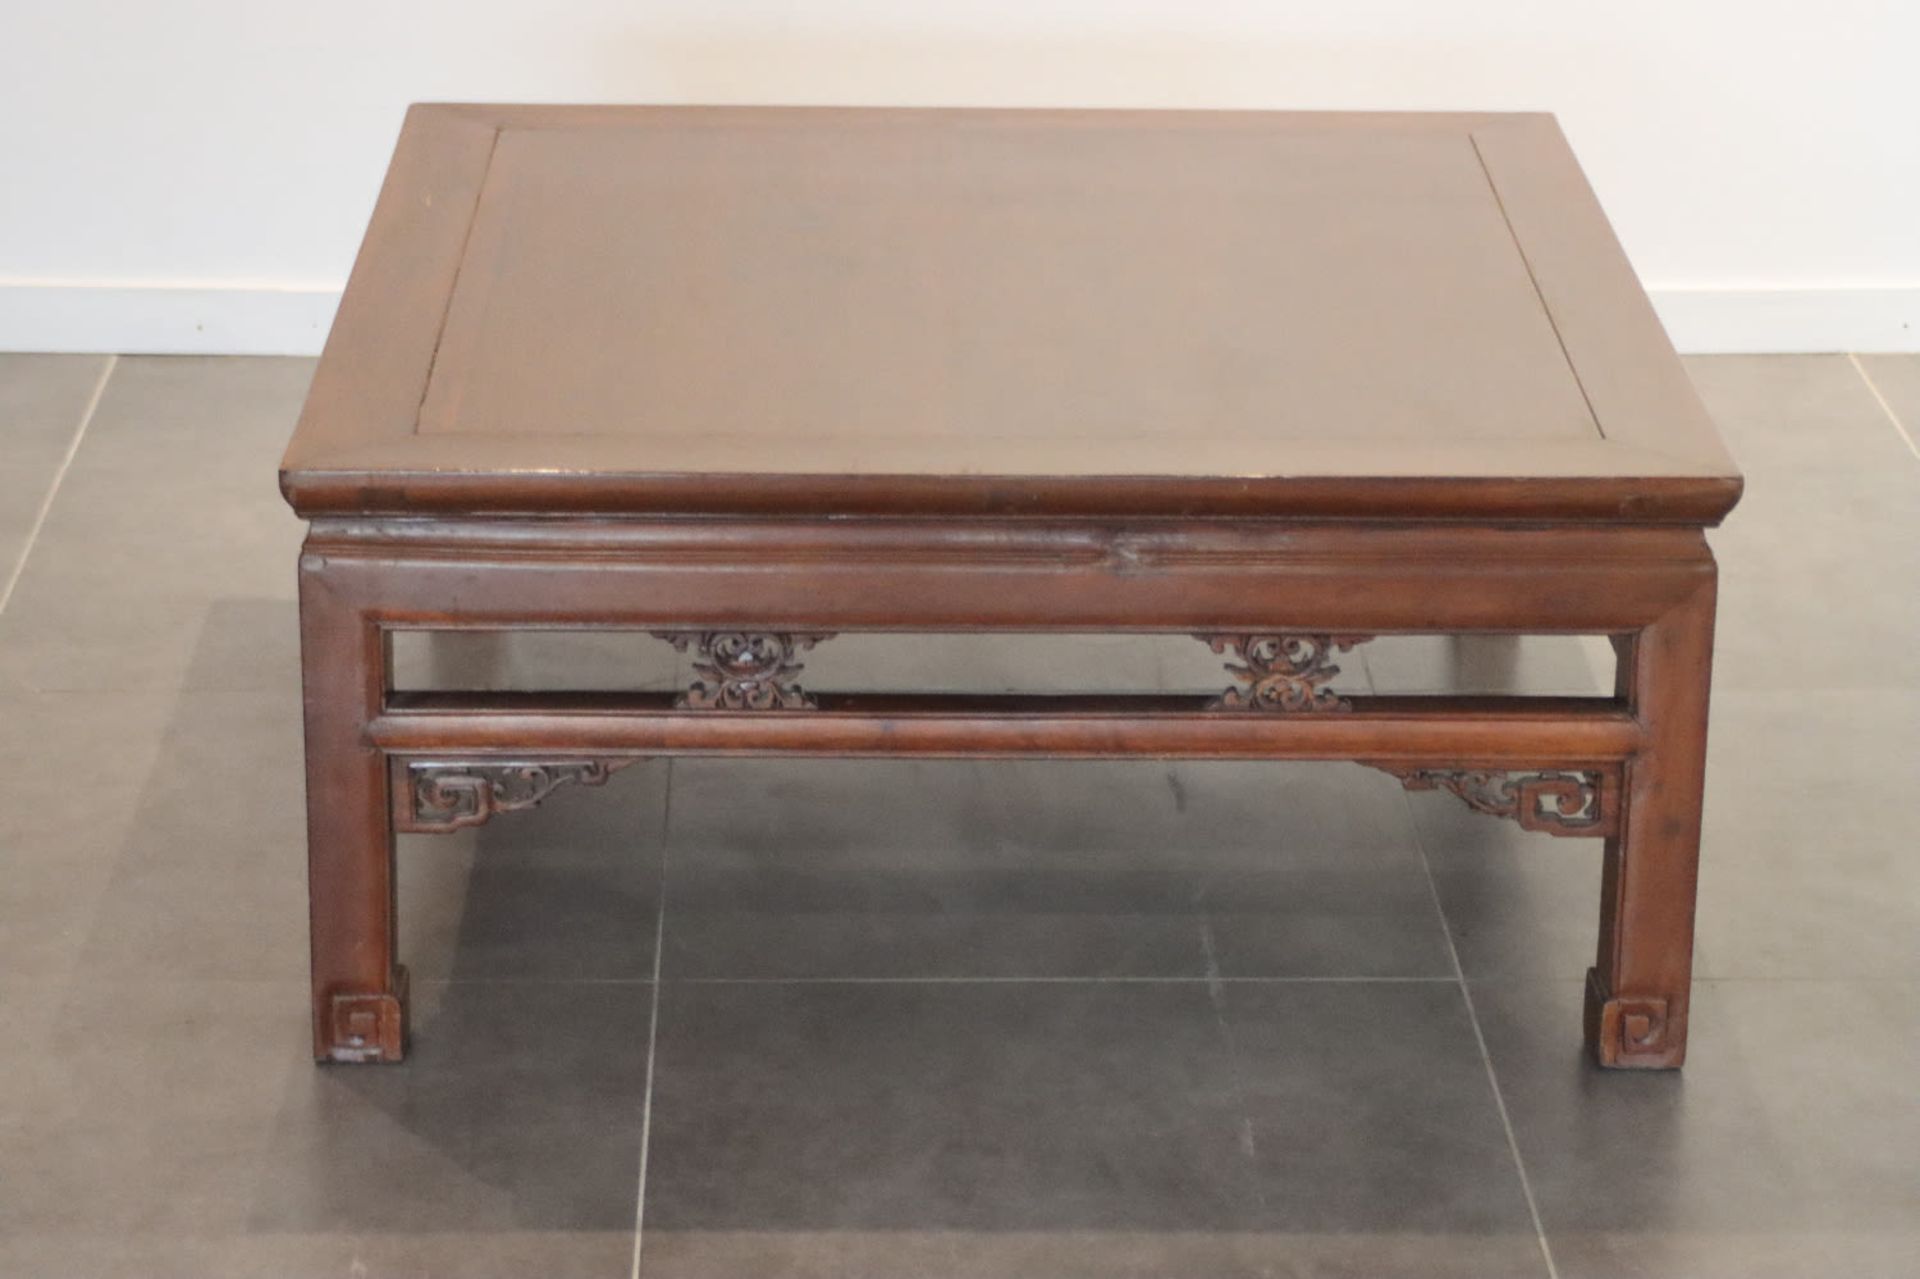 A Chinese square low table, 20th Century - Image 2 of 3